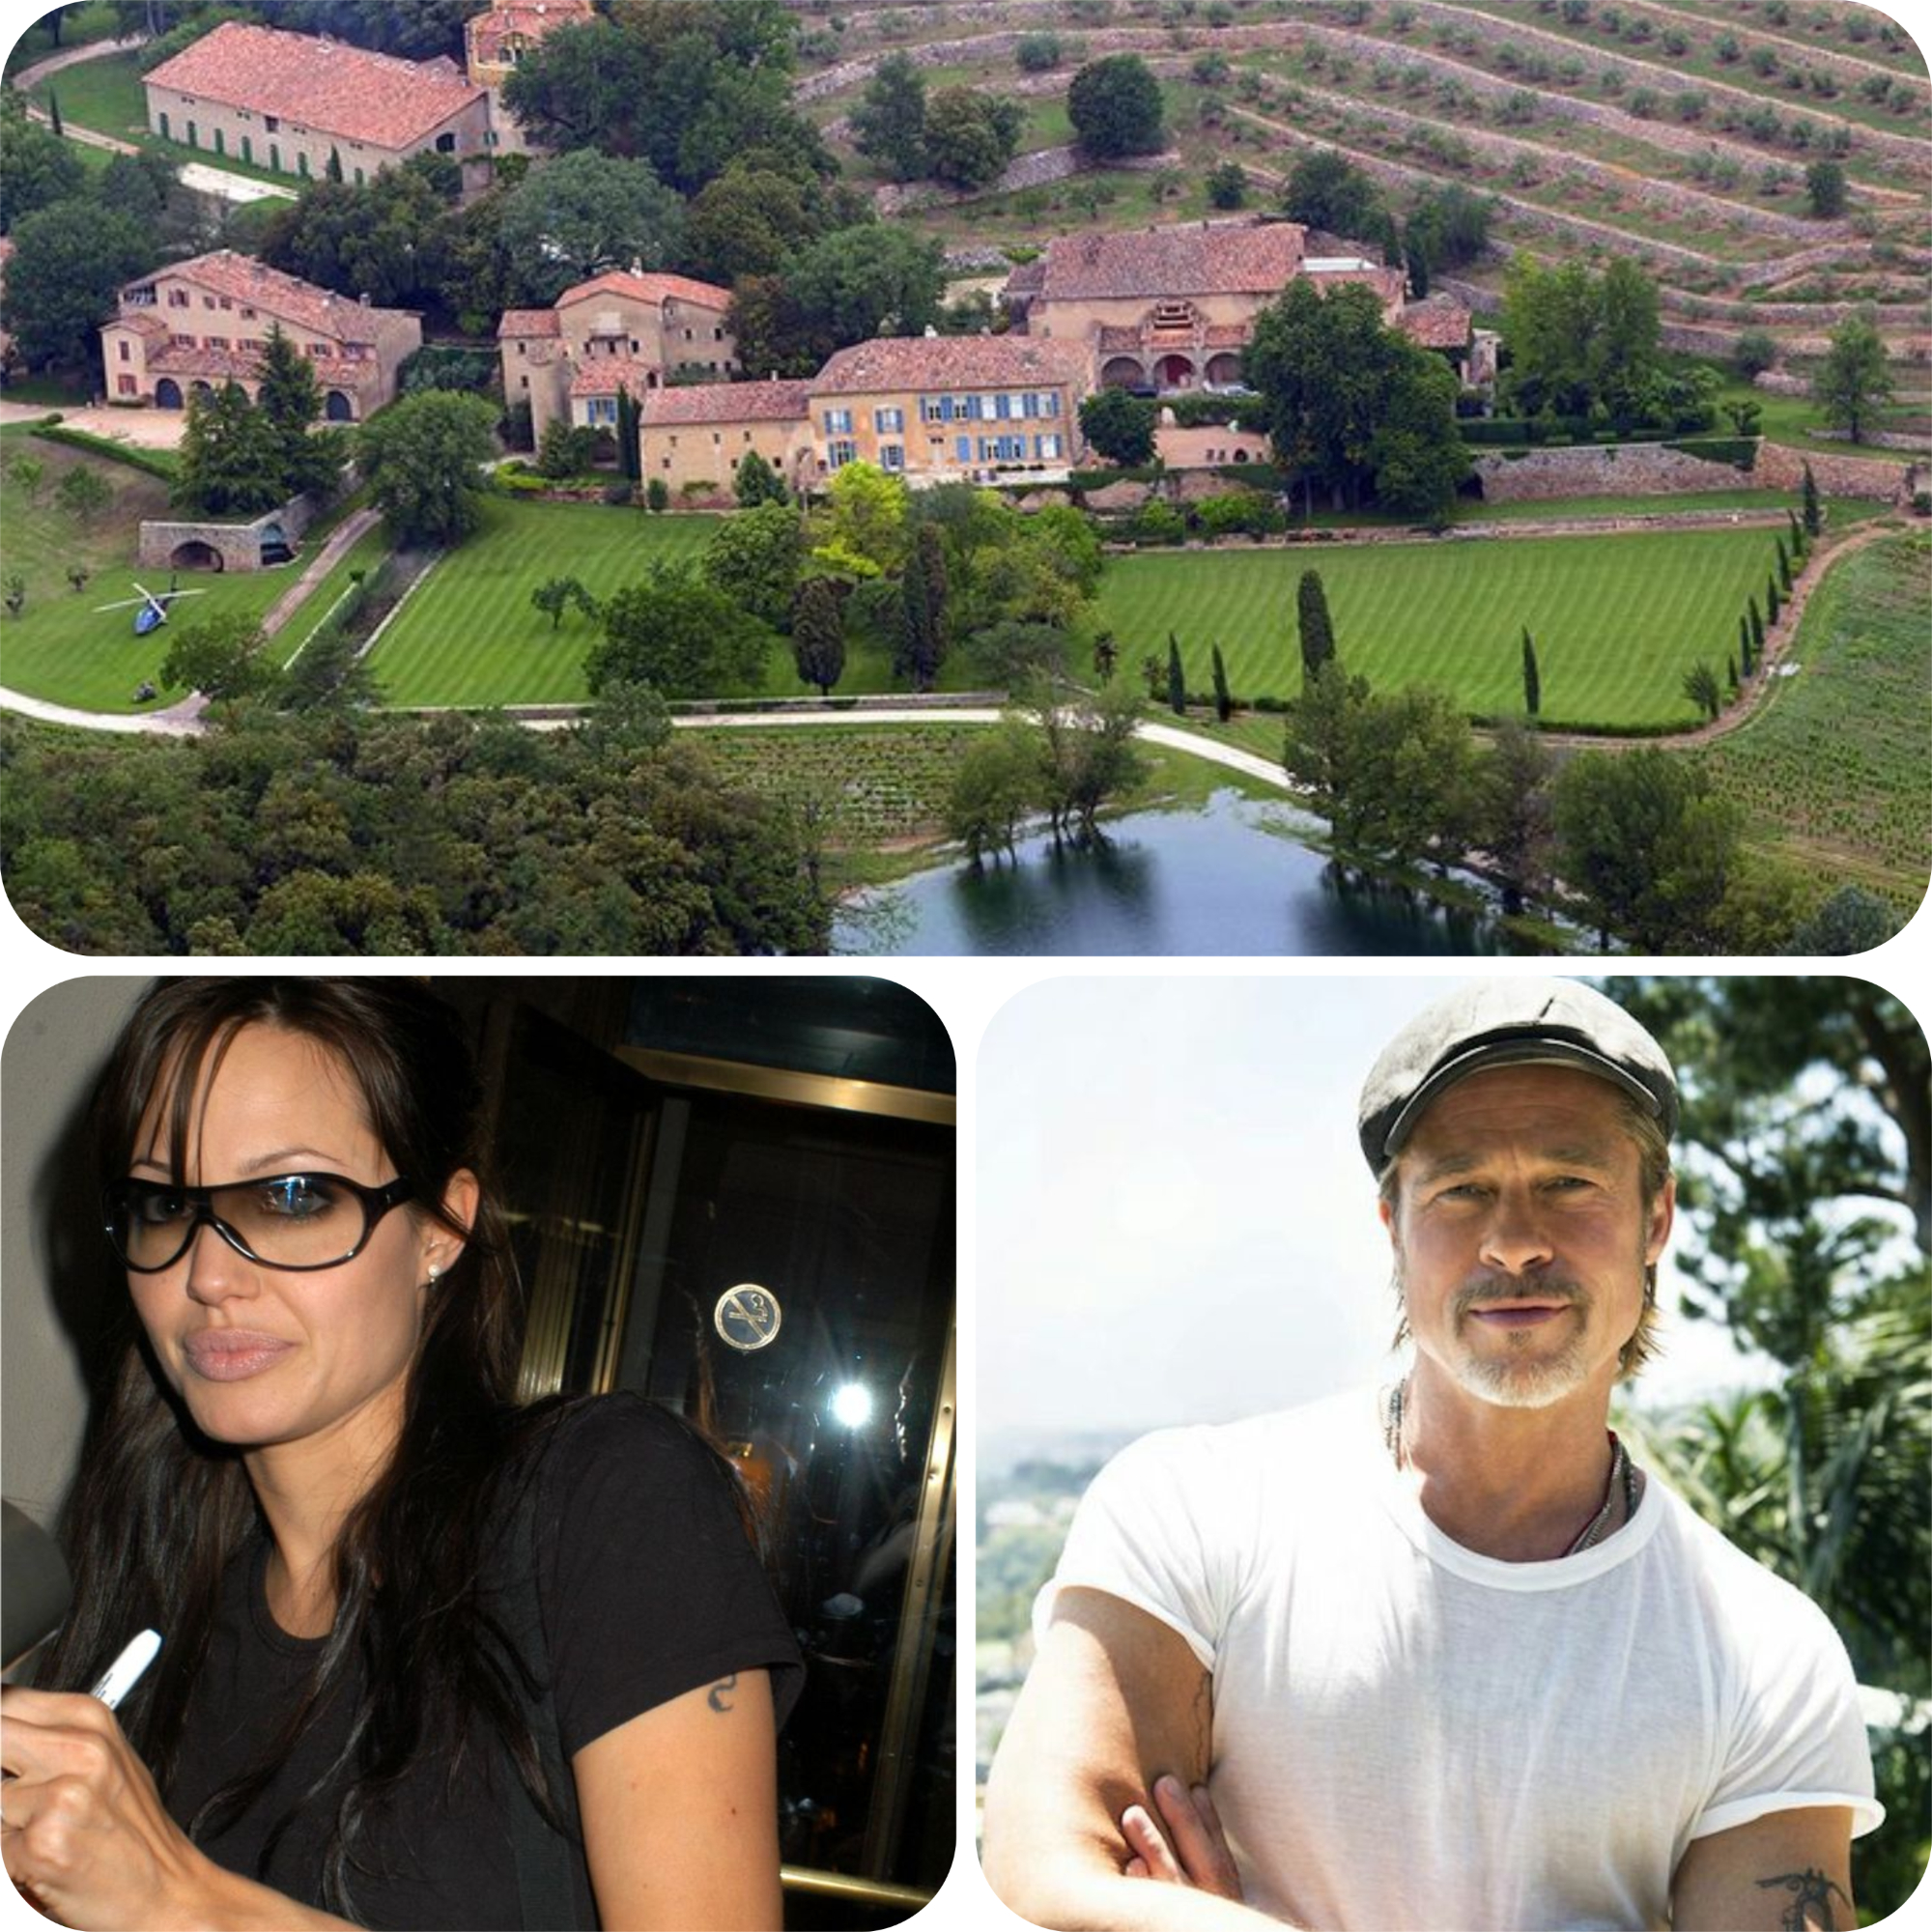 Jolie Sells Shares to Russian Oligarch? Pitt claims Jolie secretly sold her stake in their French winery, Chateau Miraval, to Yuri Shefler, a Russian businessman with alleged ties to Putin. 